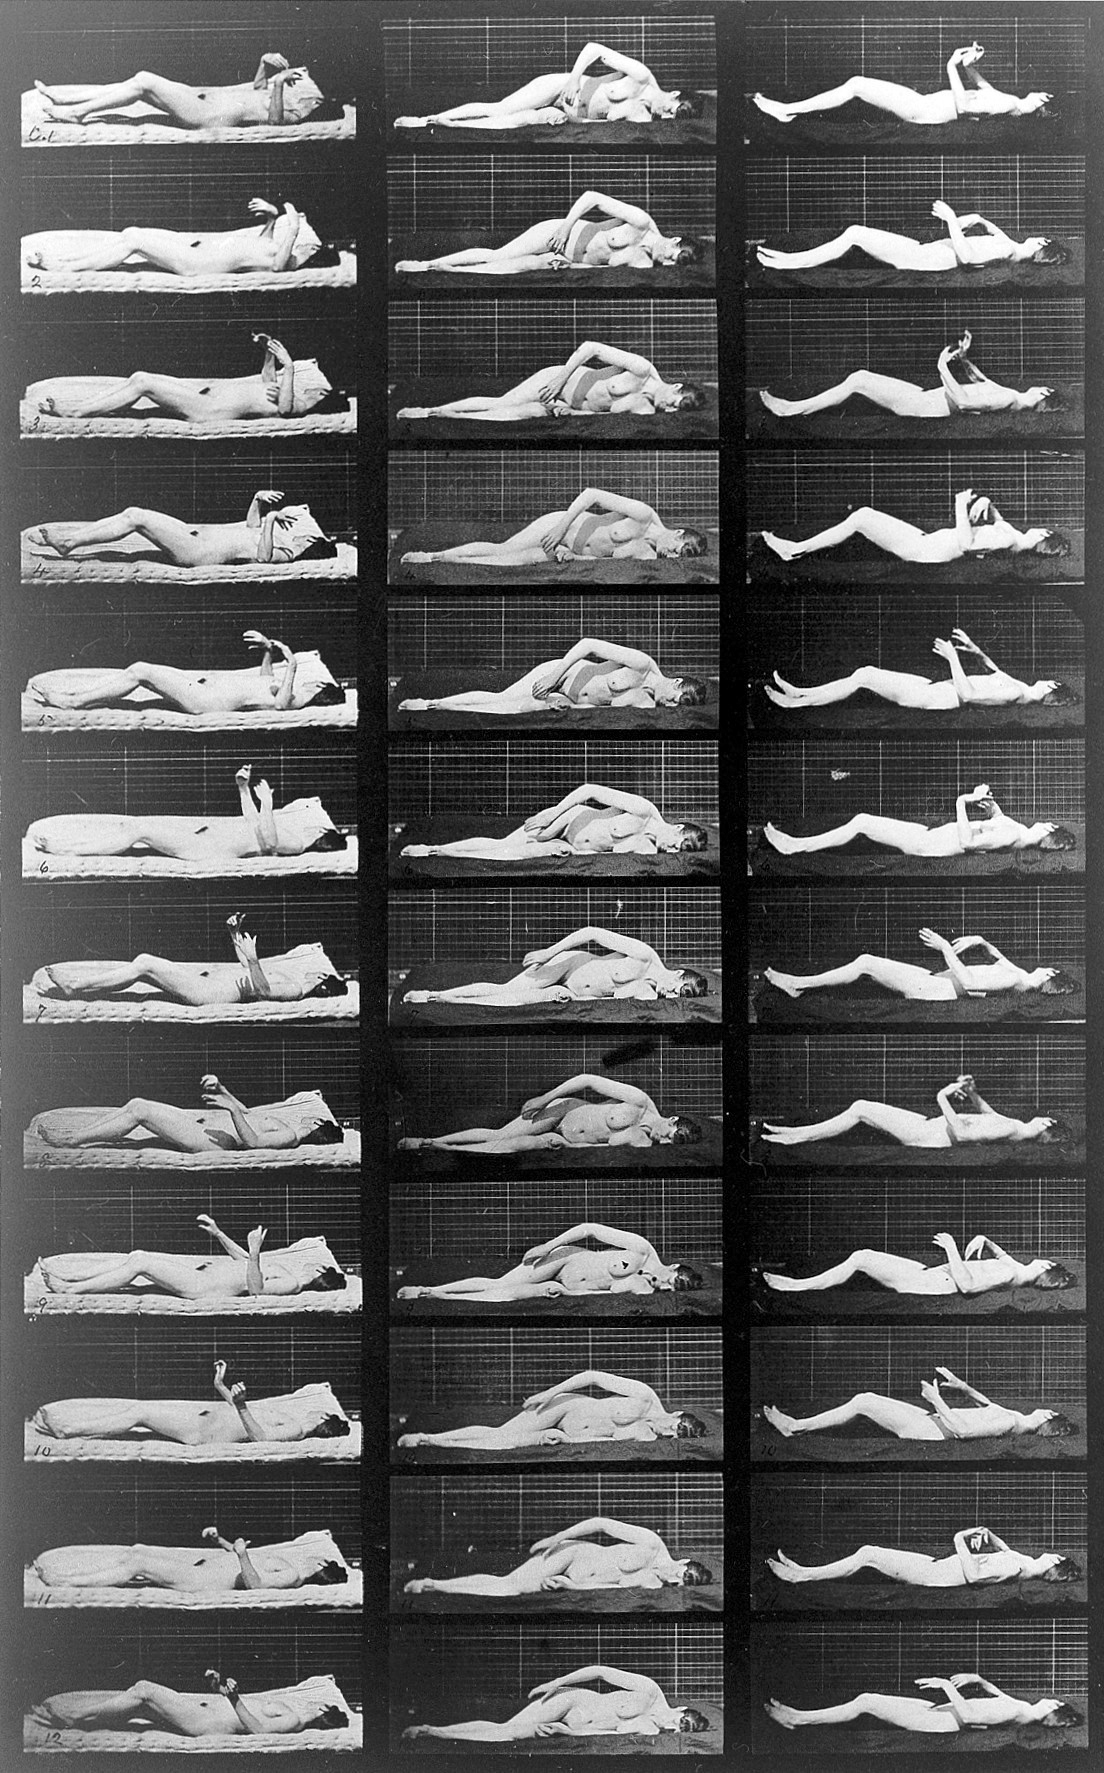 36 sequential photographs of a naked woman having an induced 'convulsion' or seizure